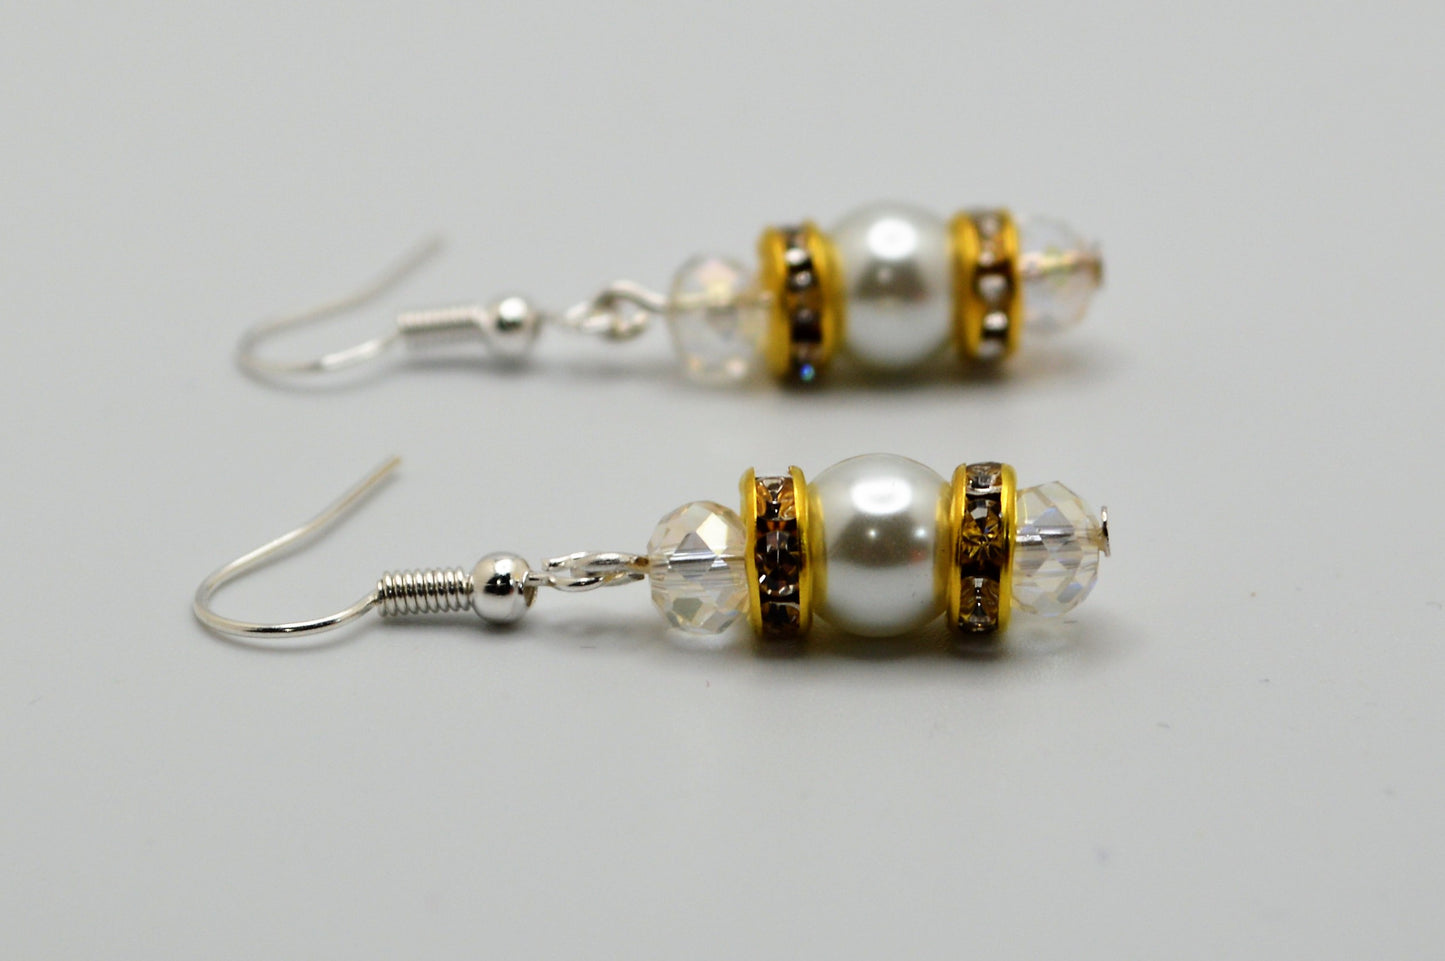 White Glass Pearl and Crystal Earrings (8mm Pearls with Silver Hooks)